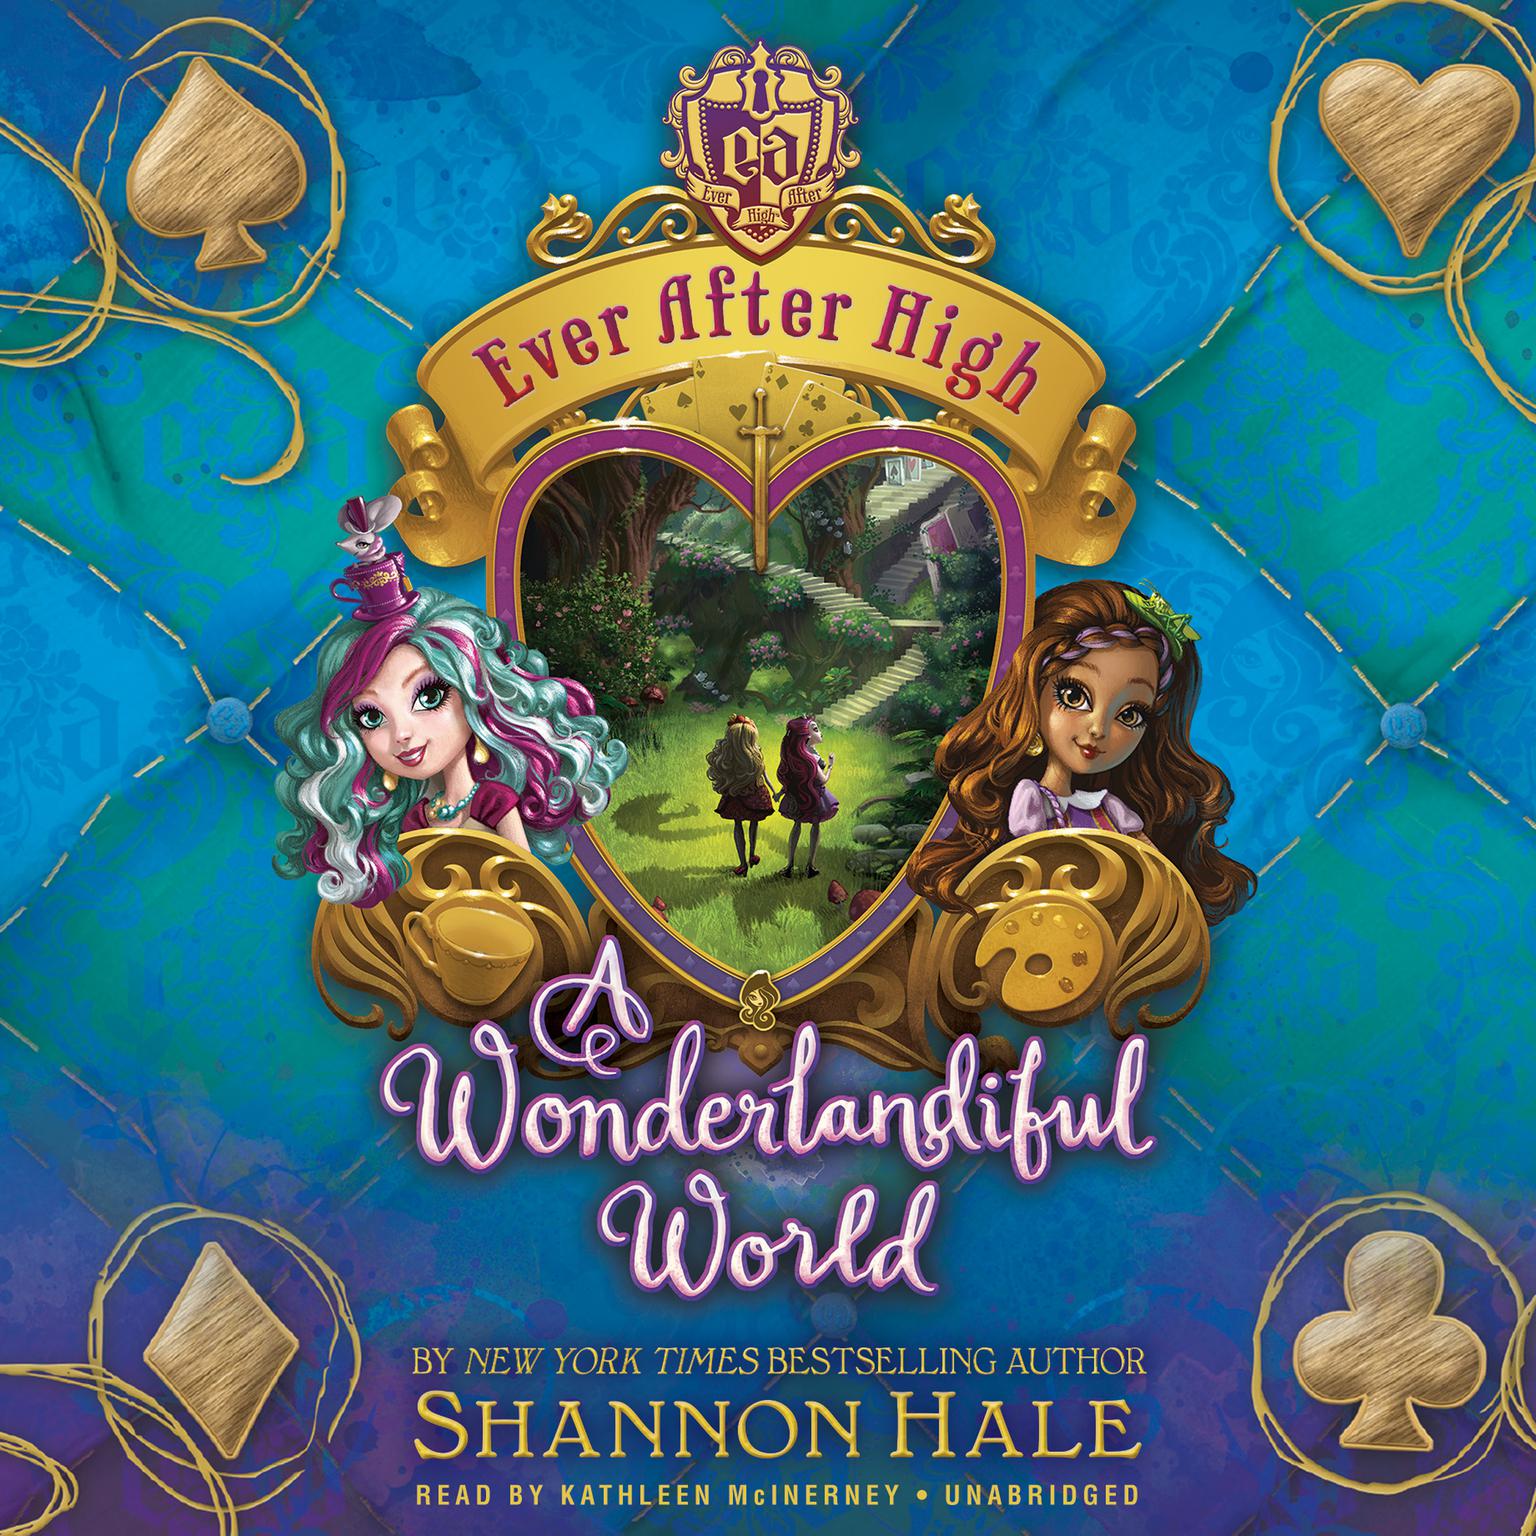 Ever After High: A Wonderlandiful World Audiobook, by Shannon Hale